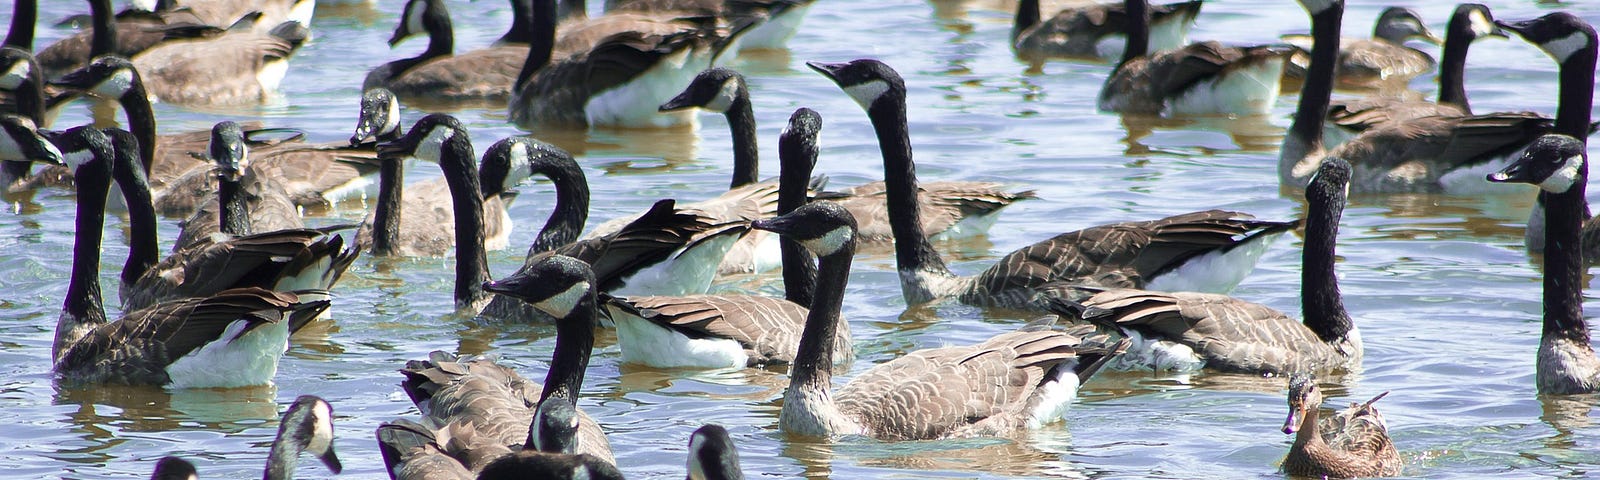 A fine selection of the finest Canadian Geese hanging out on the water. Source: pixabay, Benjcoll